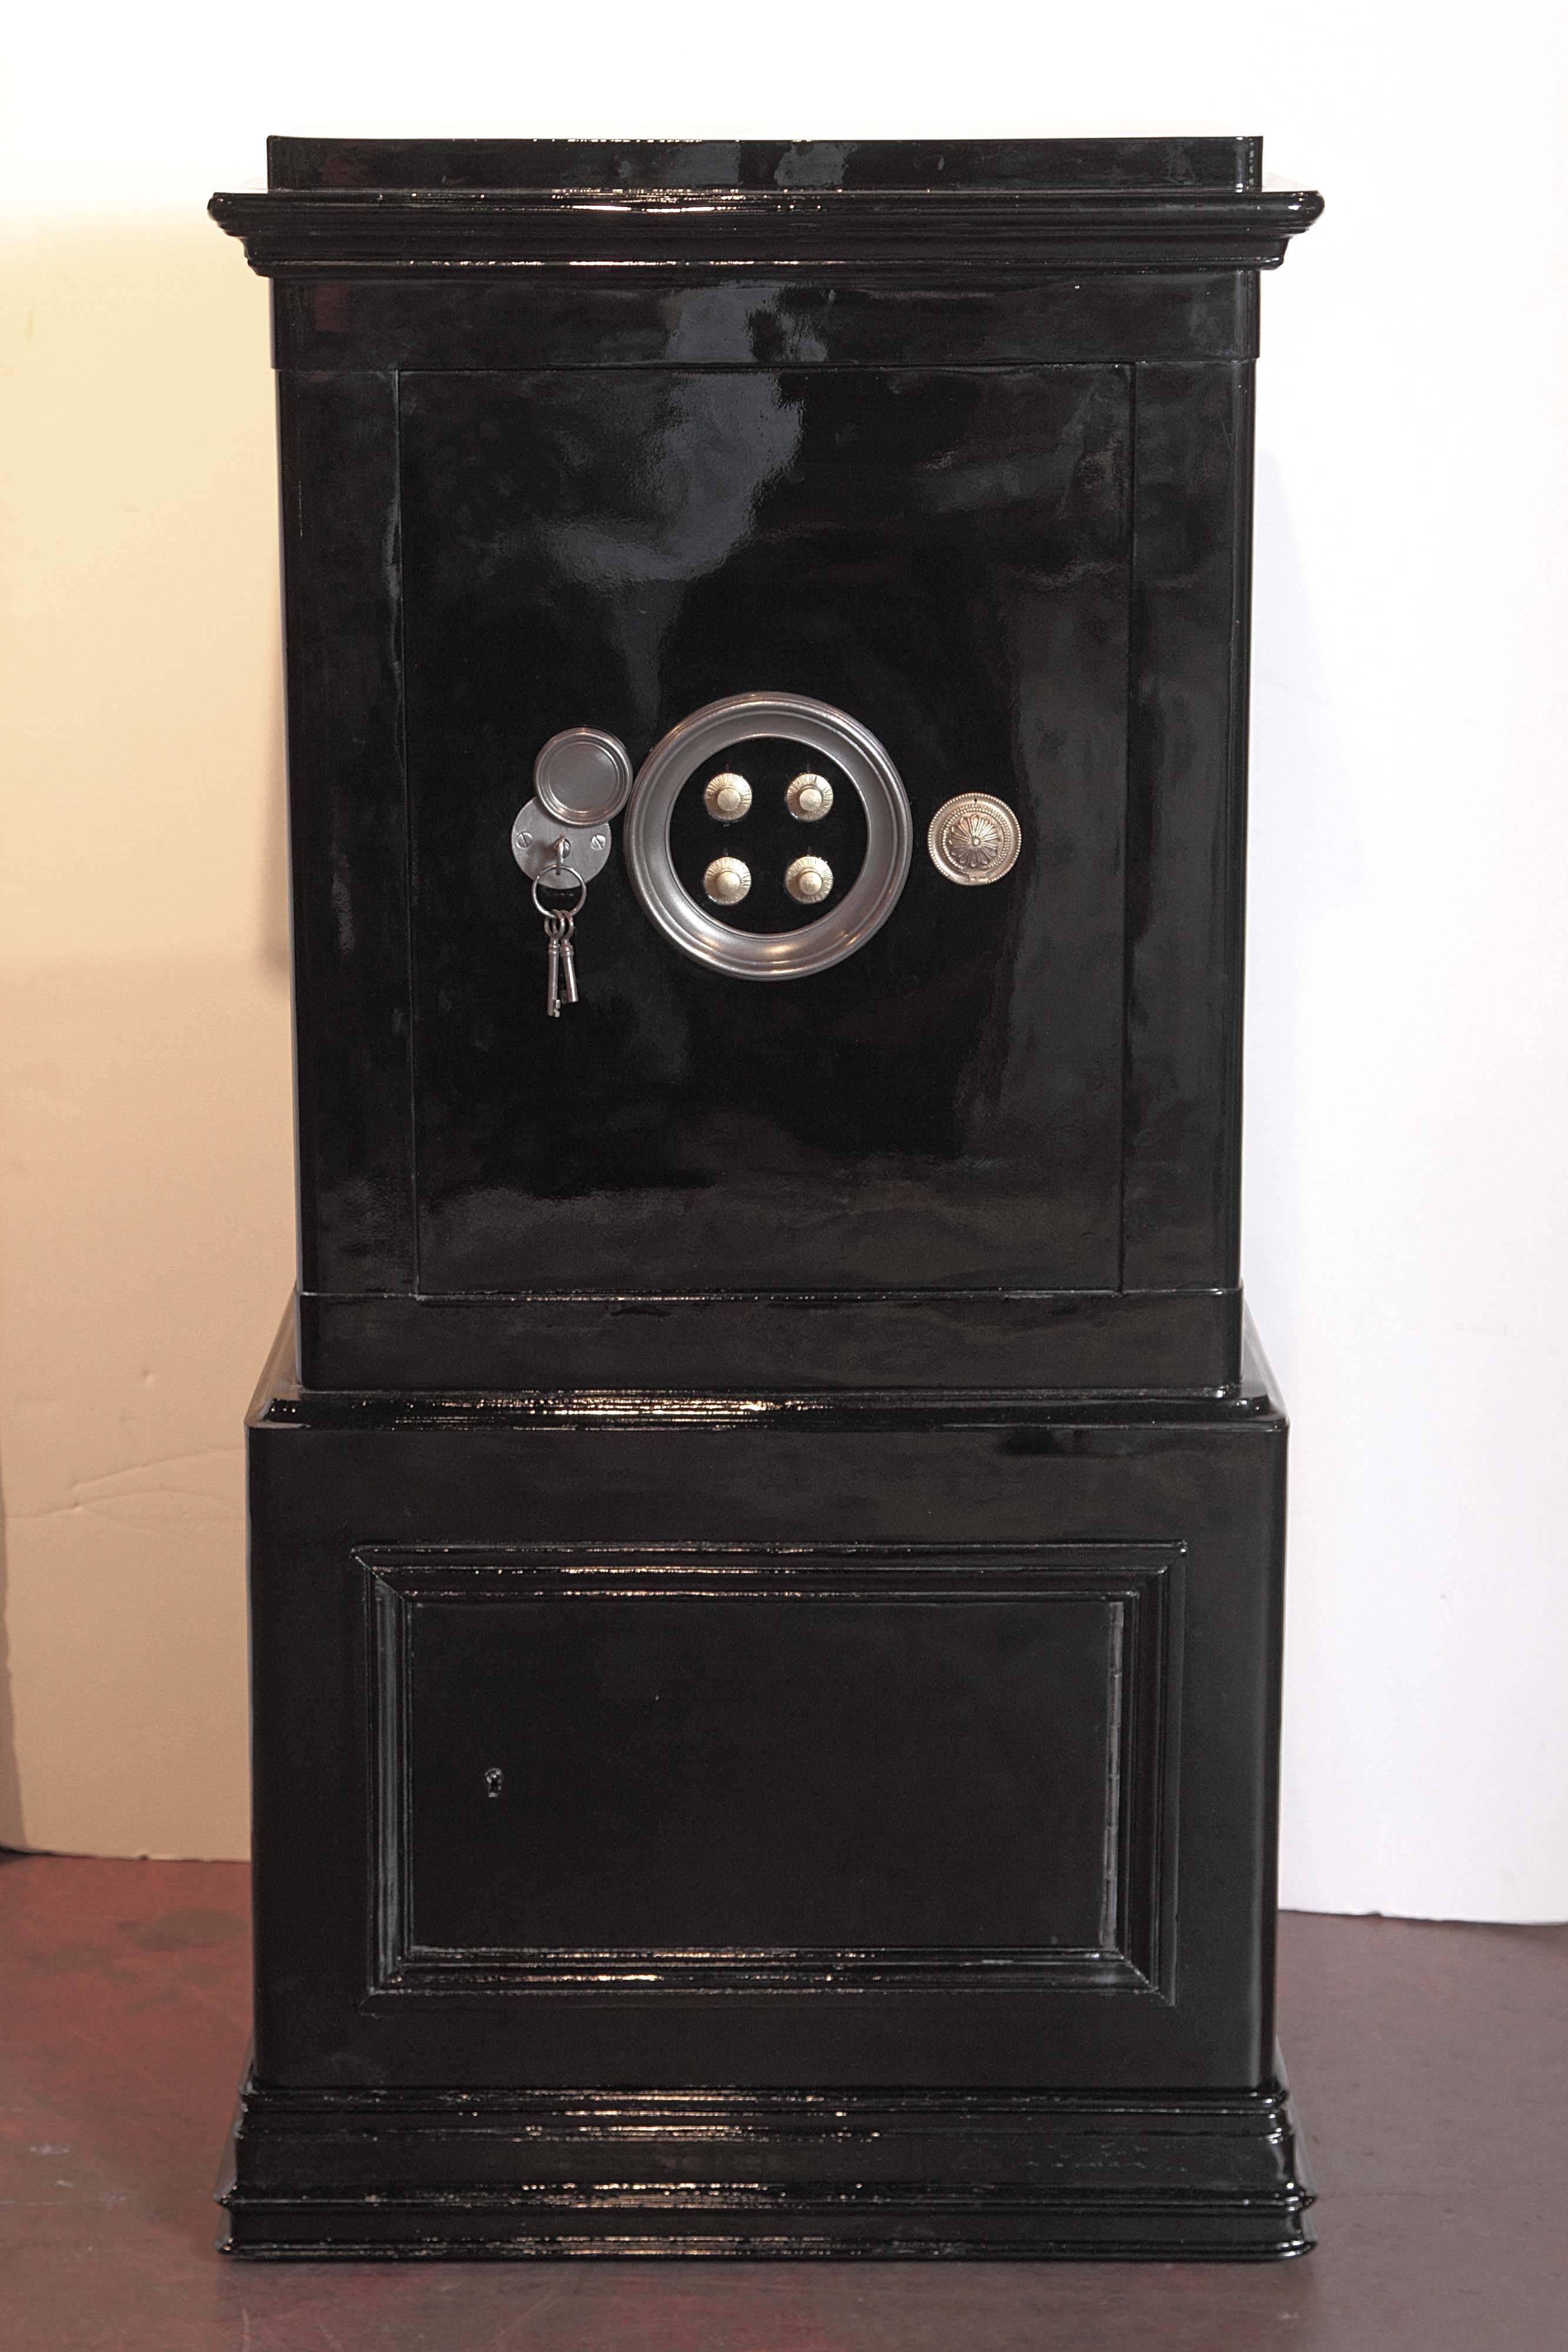 Keep your belongings secure with this large, antique safe from Paris. Crafted circa 1890, the safe has been completely repainted with a metallic black paint outside and an off-white paint inside. The safe has a beautiful, strong front door with